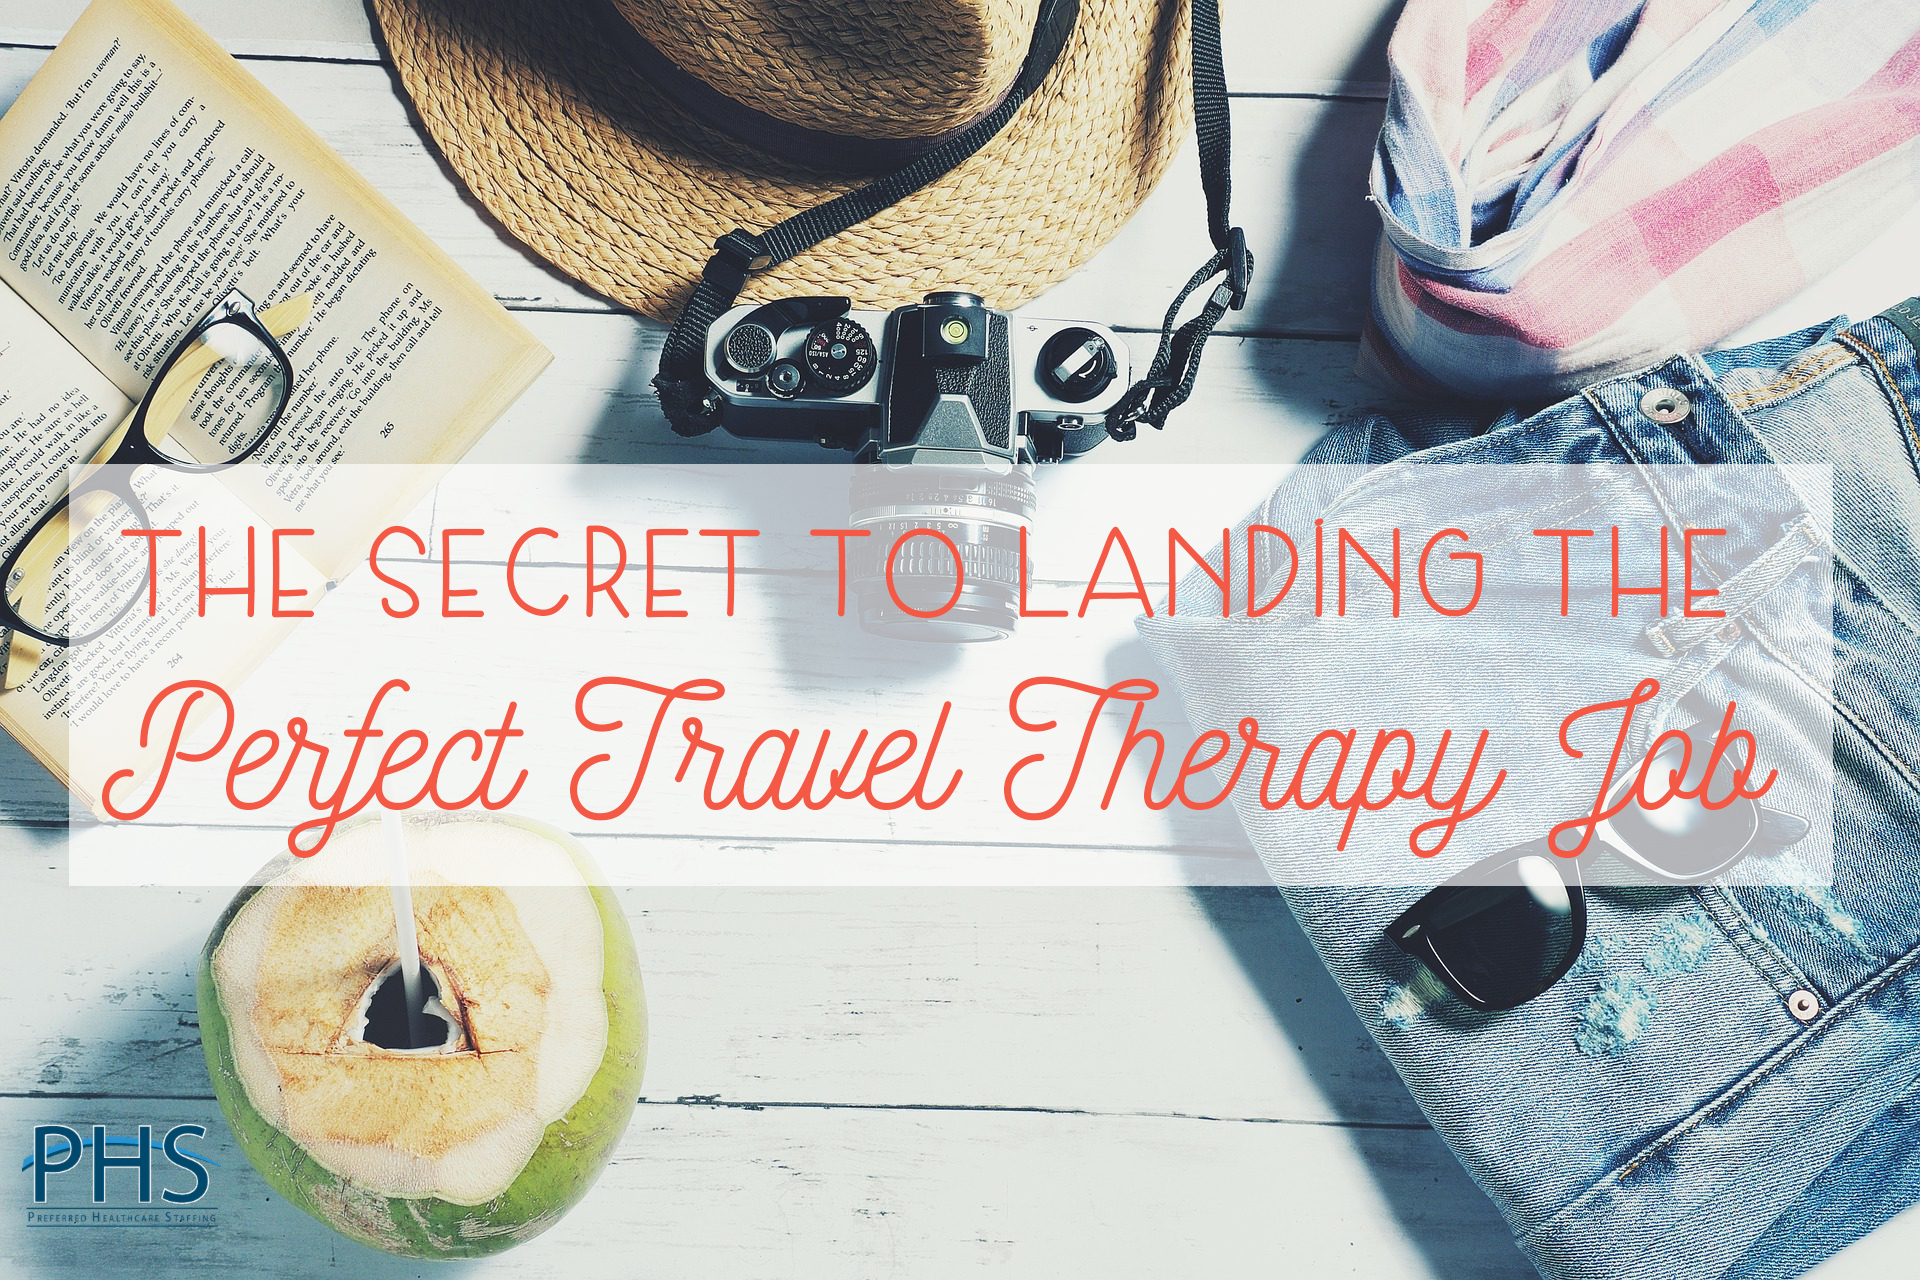 The Secret to Landing the Perfect Travel therapy Job